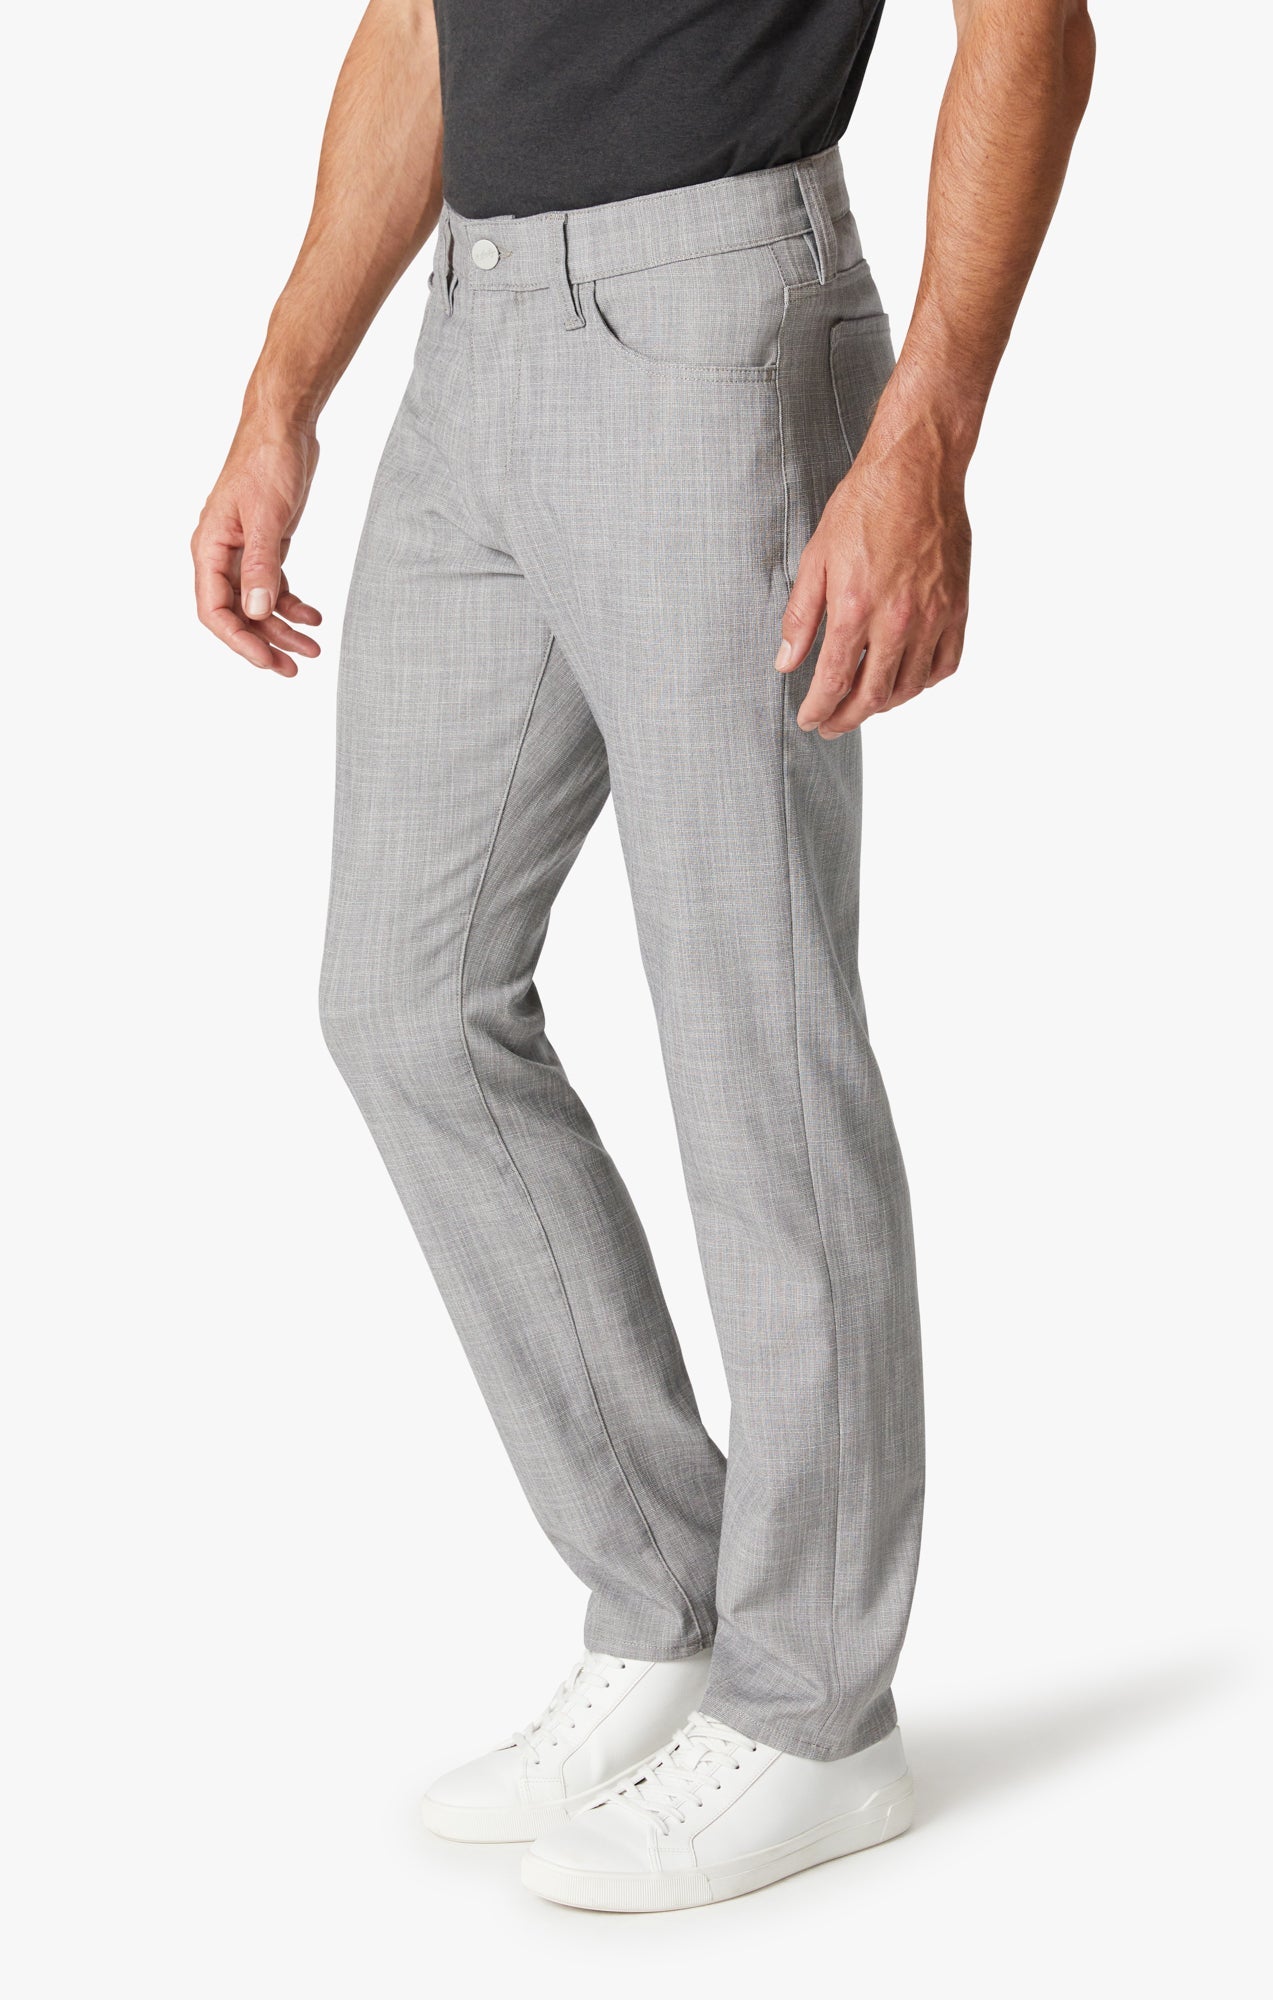 Charisma Relaxed Straight Pants In Magnet Cross Twill Image 4